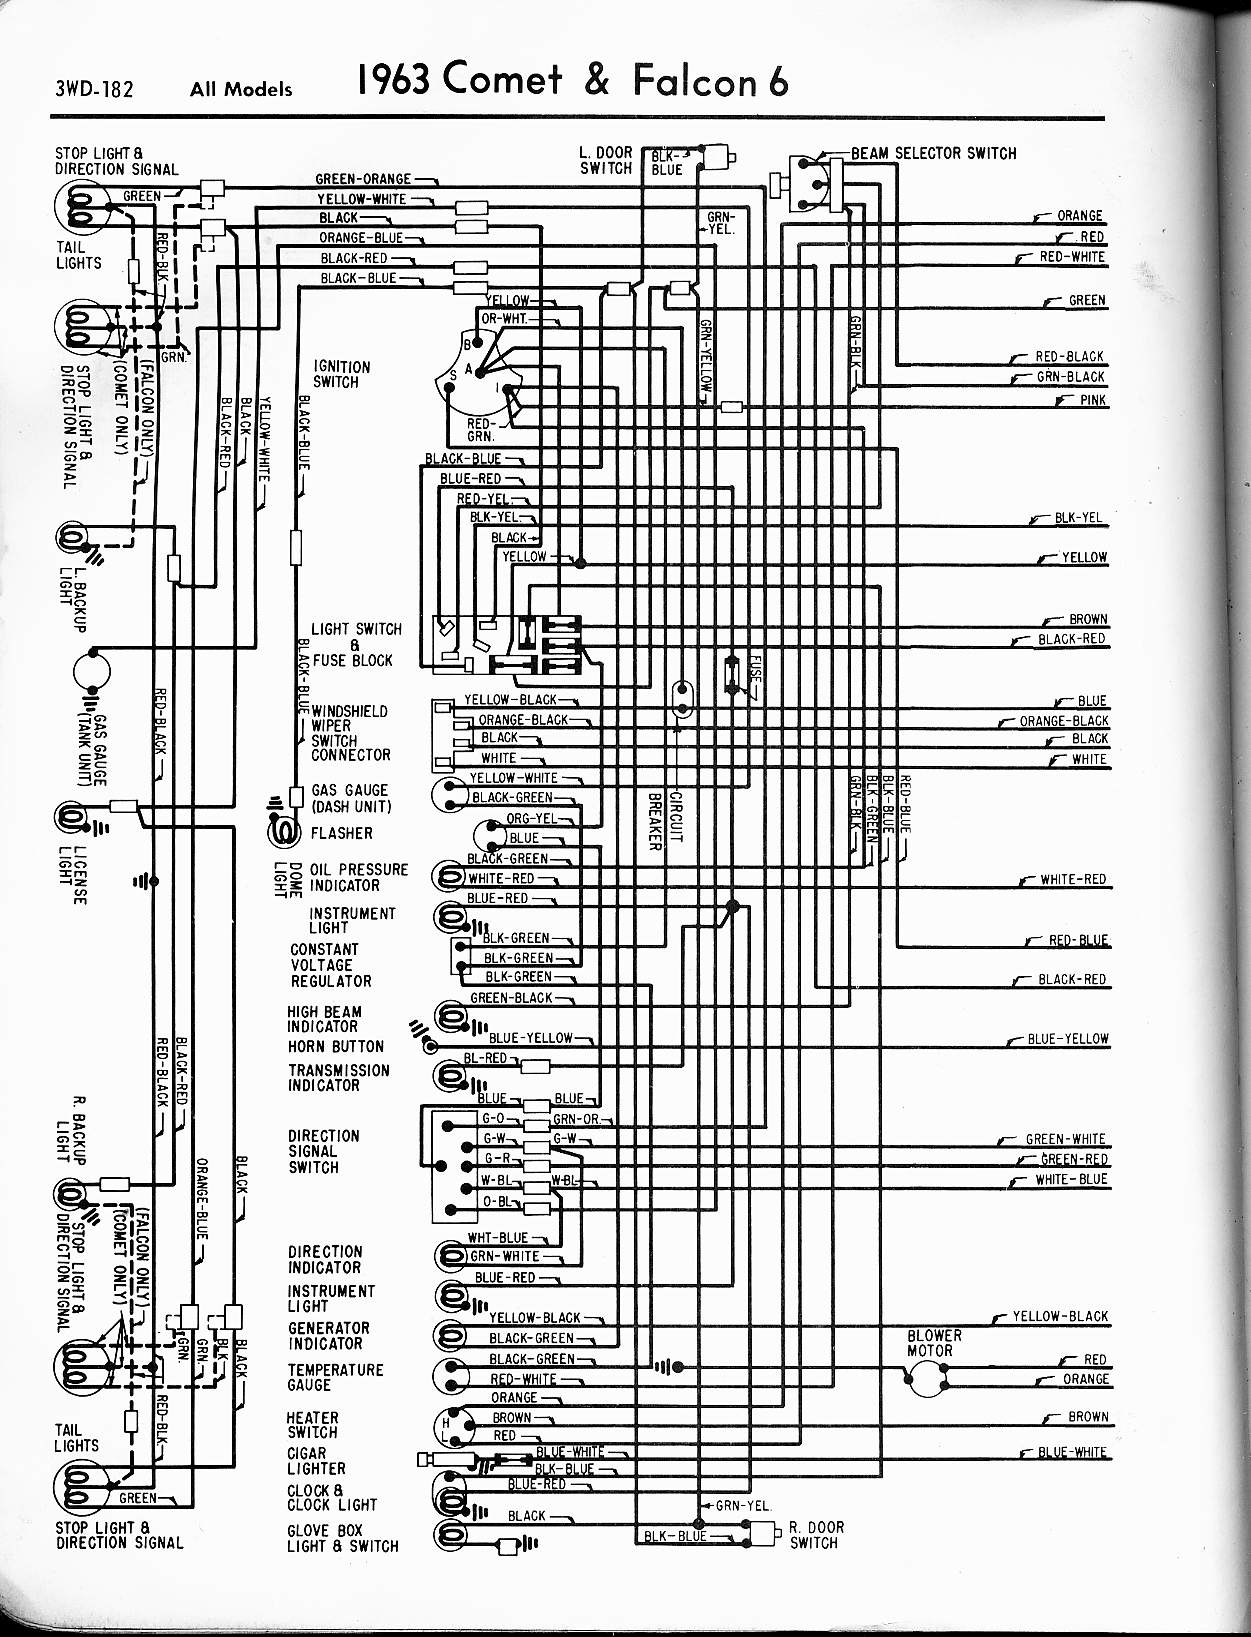 1963 Ranchero wiring diagram, anyone got one? - Ford Muscle Forums